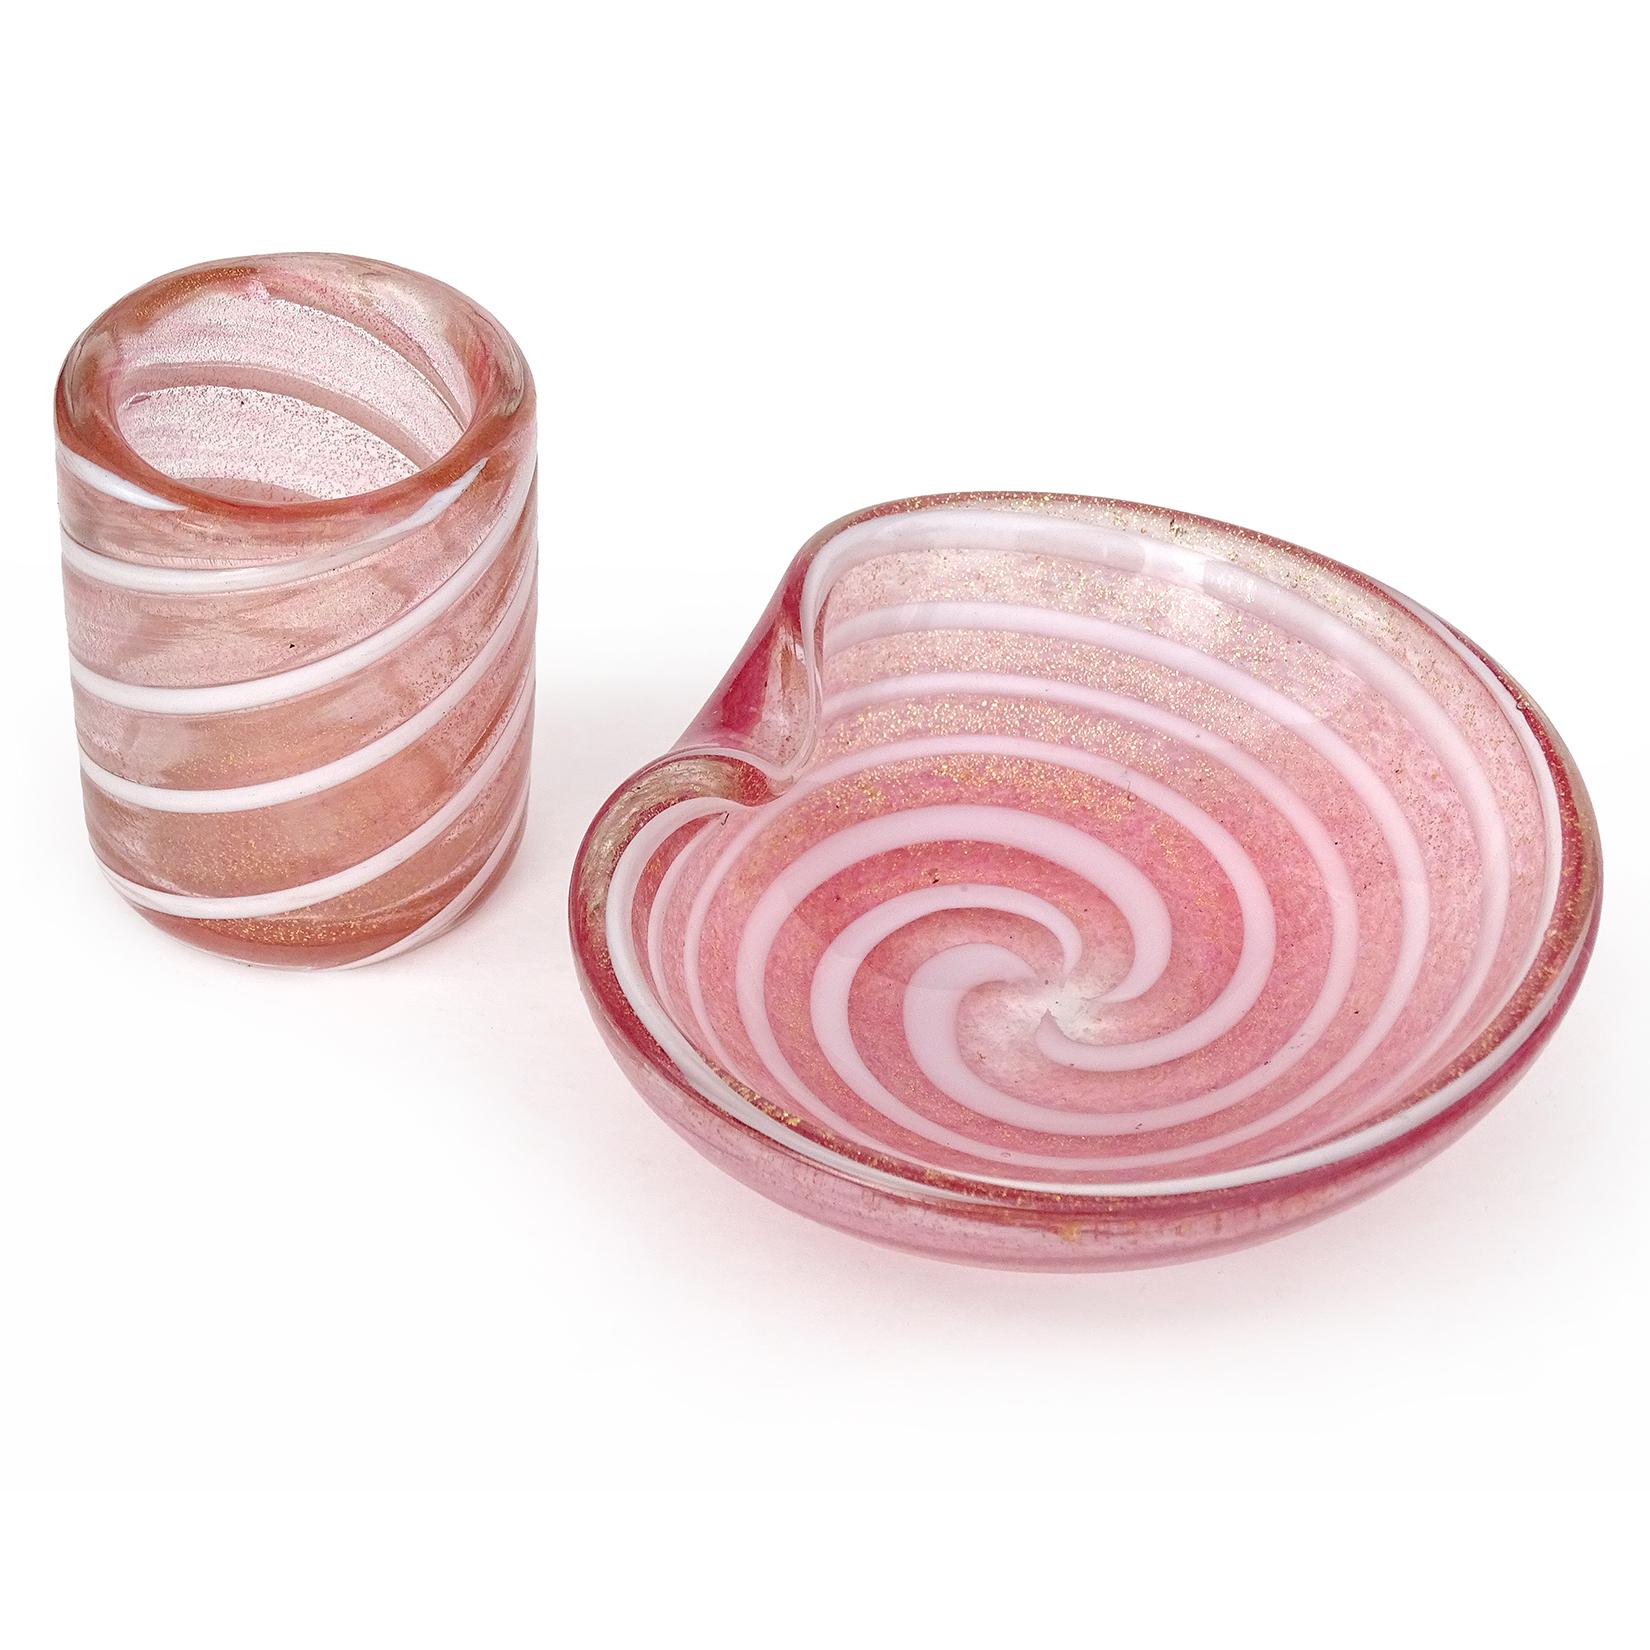 Beautiful vintage Murano hand blown pink, white and gold flecks Italian art glass bowl and holder set. Documented to designer Alfredo Barbini. The color of both pieces is made with little dots of pink color. They have a white swirl design, and